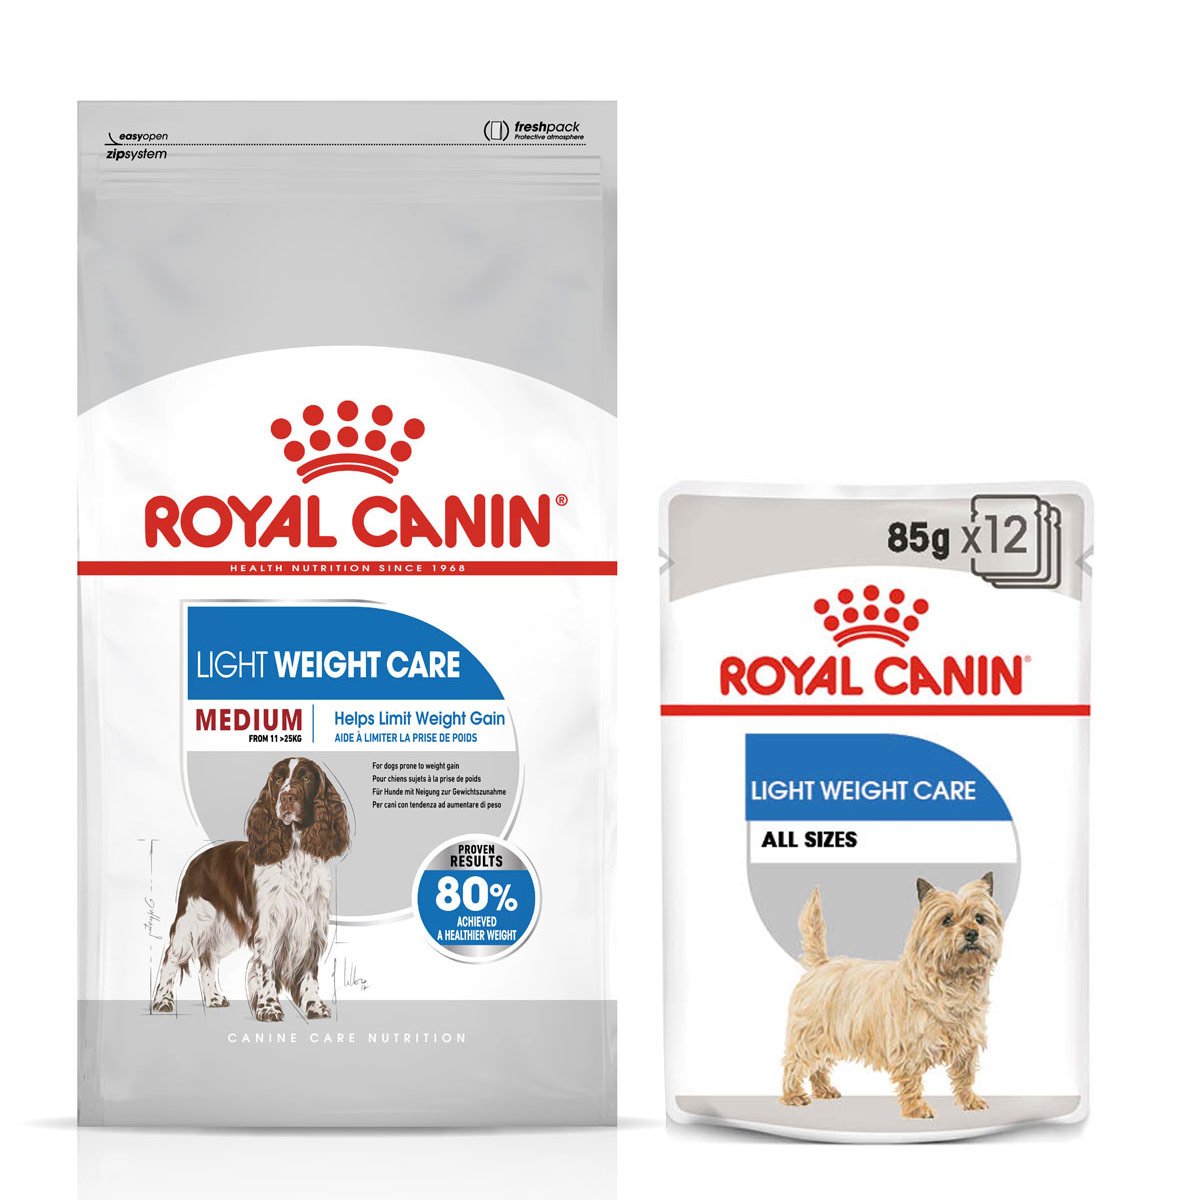 ROYAL CANIN LIGHT WEIGHT CARE MEDIUM 3kg + Mousse 12x85g von Royal Canin